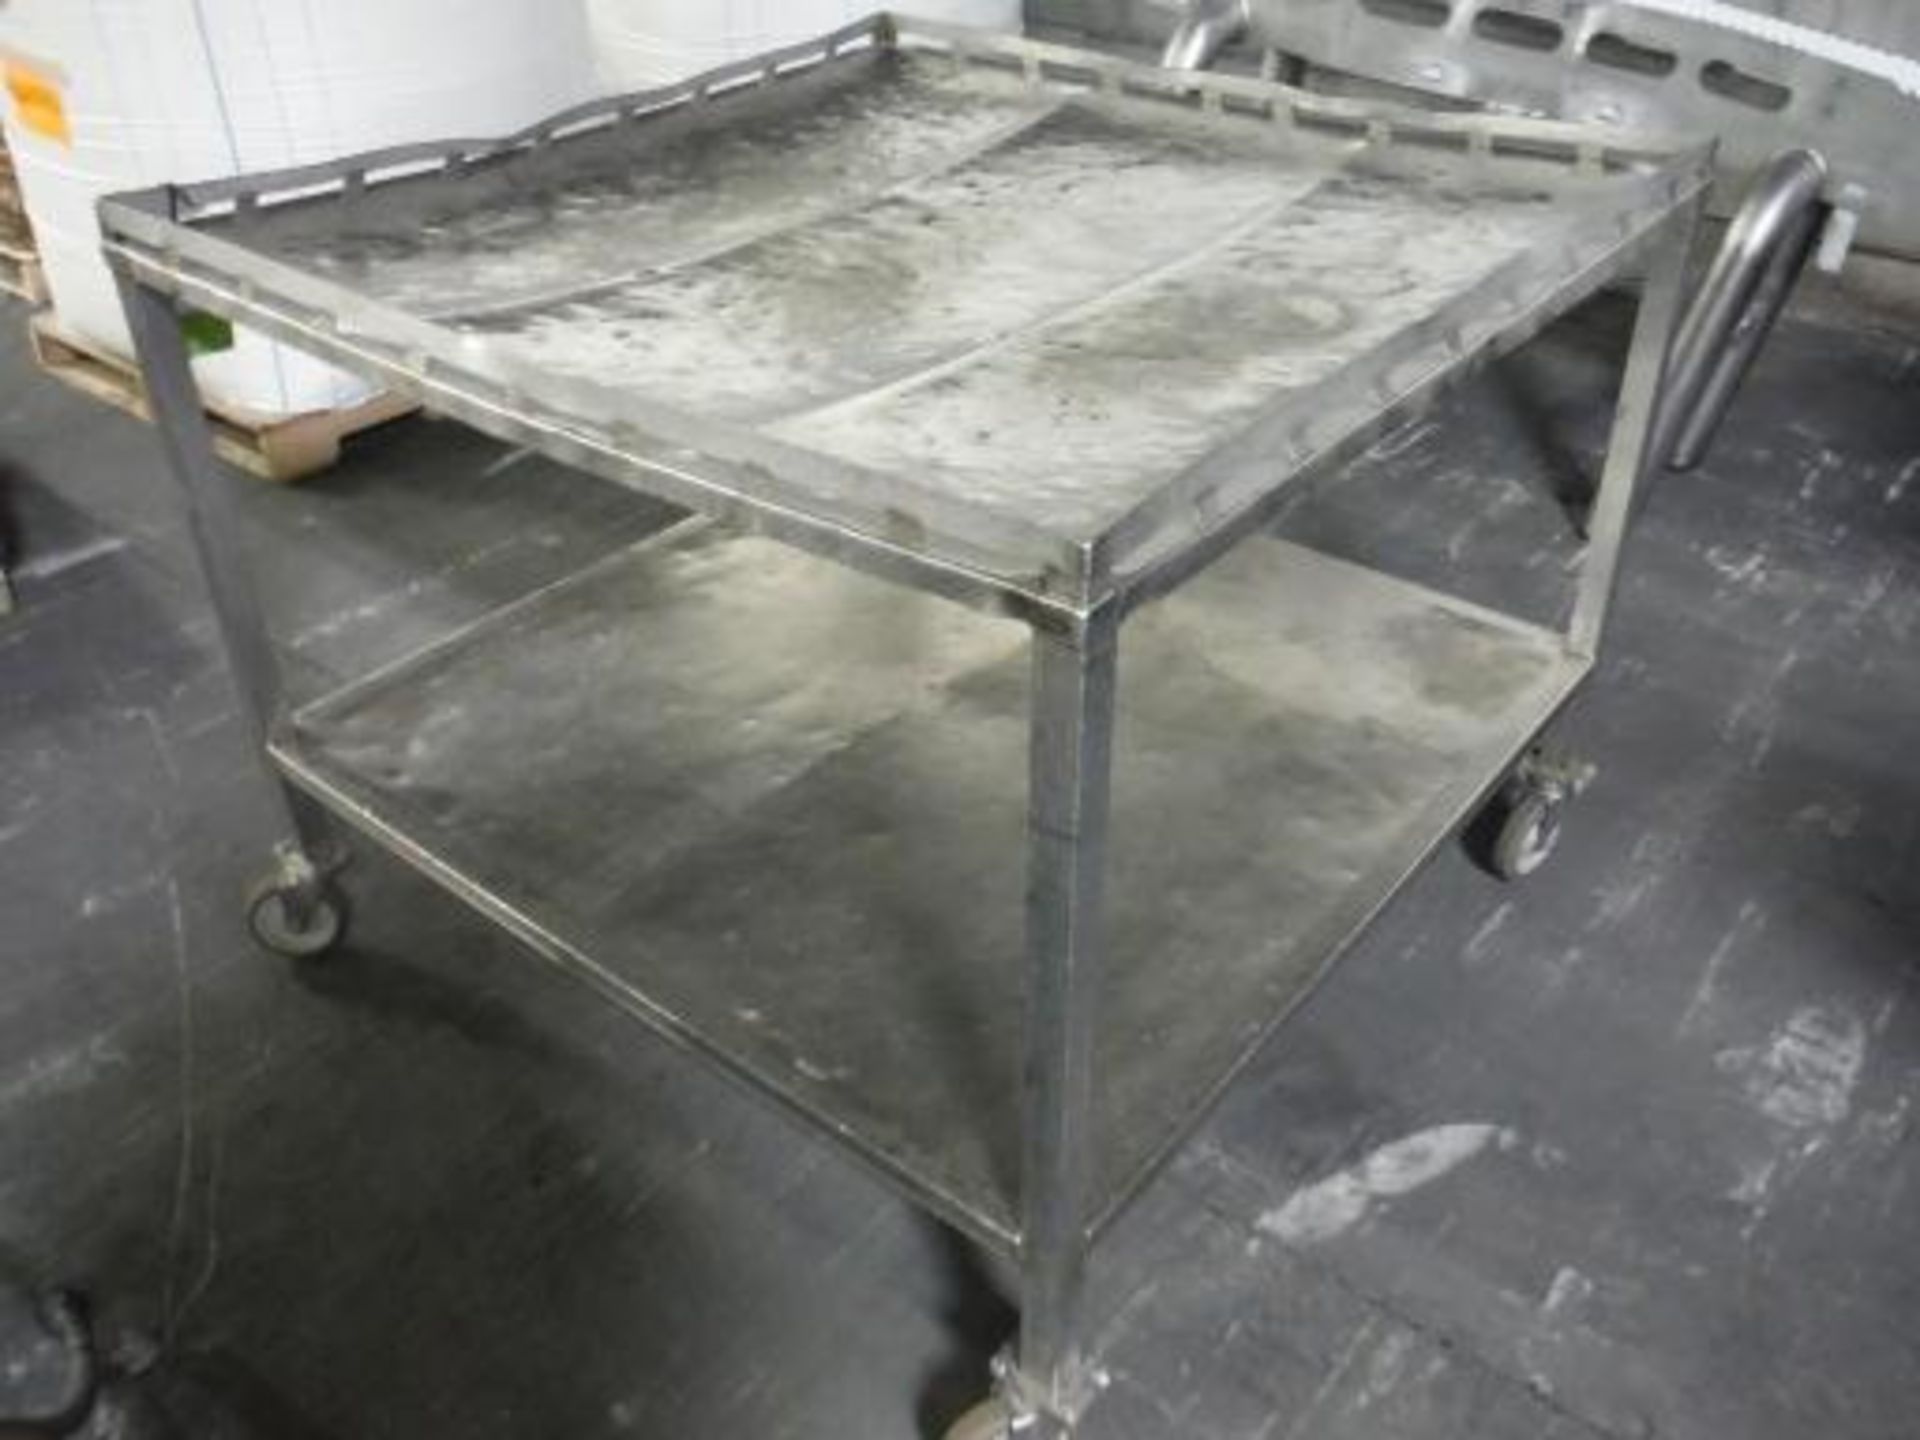 SS table, 46 in. long x 46 in. wide x 36 in. tall, 2 level, casters This item is located in